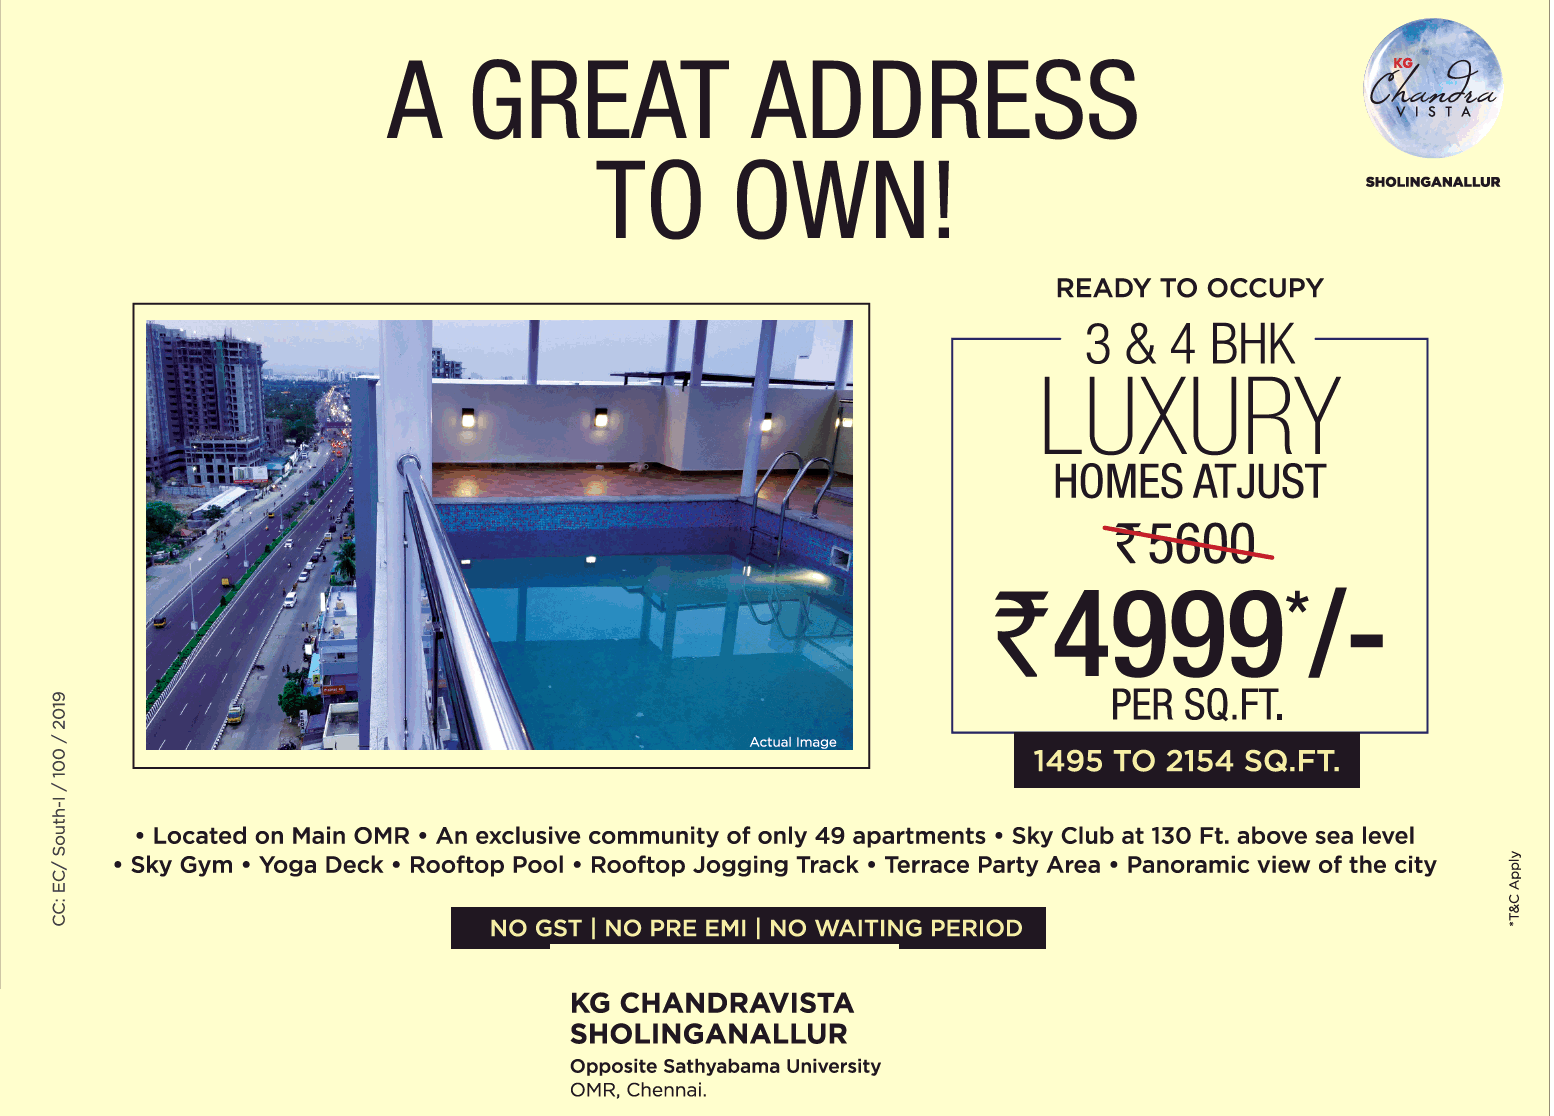 Book 3 & 4 BHK luxury homes at just Rs 4999 per sq.ft at KG Chandra Vista, Chennai Update